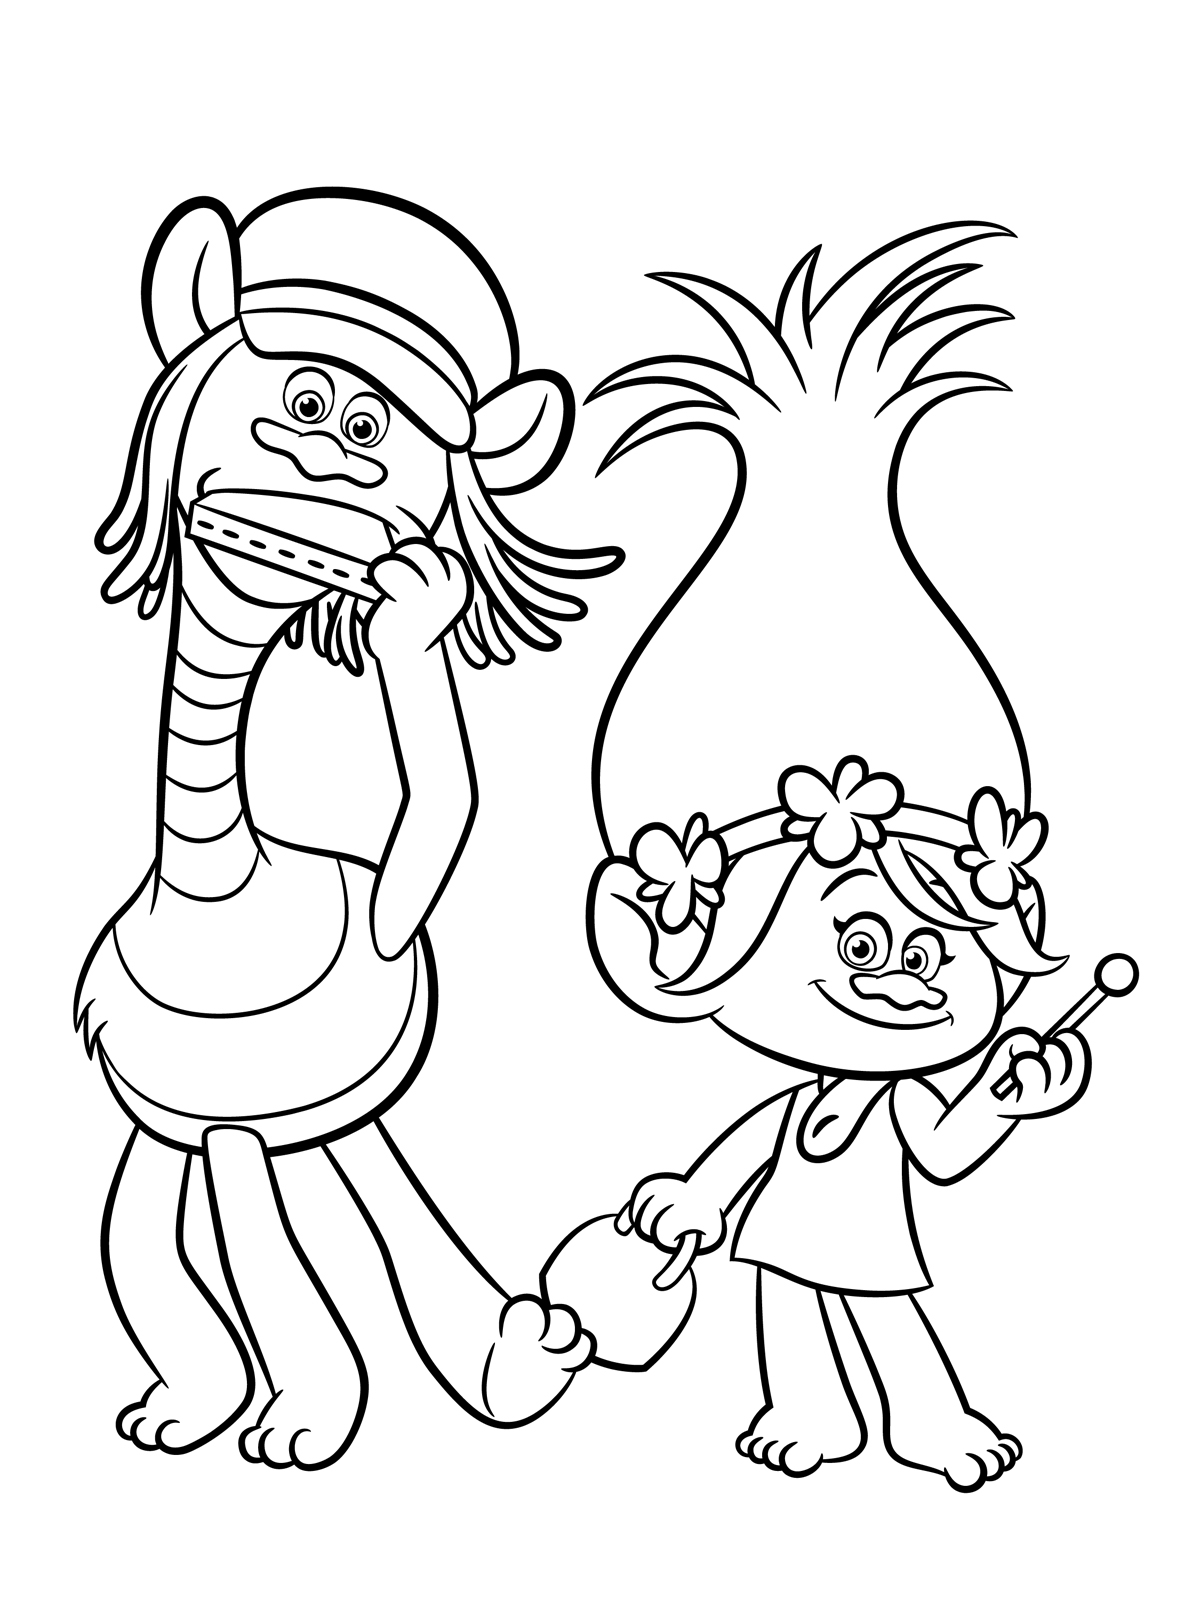 Cartoon Printable Cartoon Coloring Pages with simple drawing